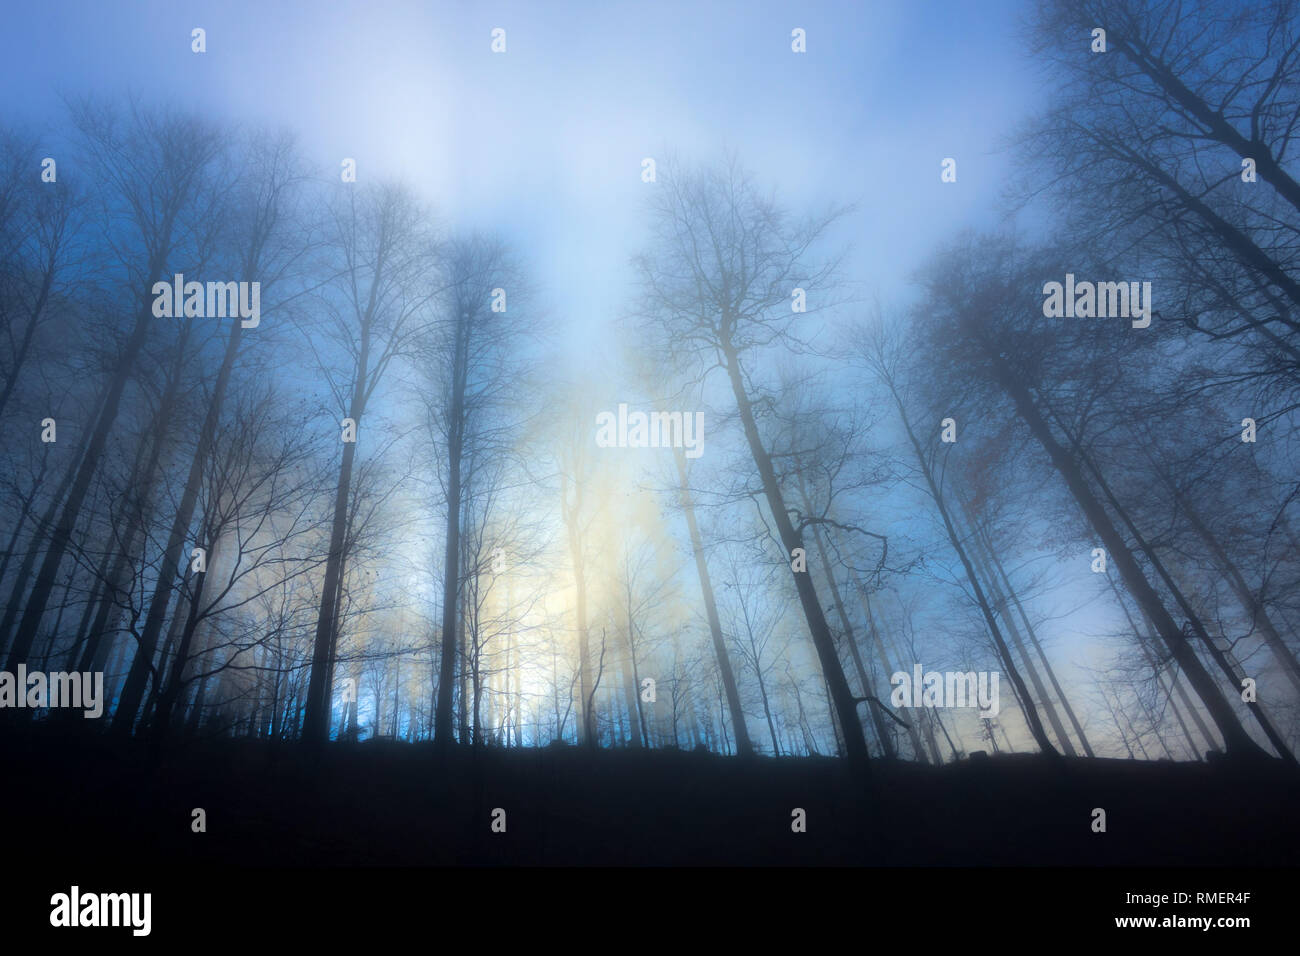 group of trees with no leafs, casting shadows  in a blue and yellow misty light and a foggy atmosphere generating a mistery and somehow cold feeling Stock Photo